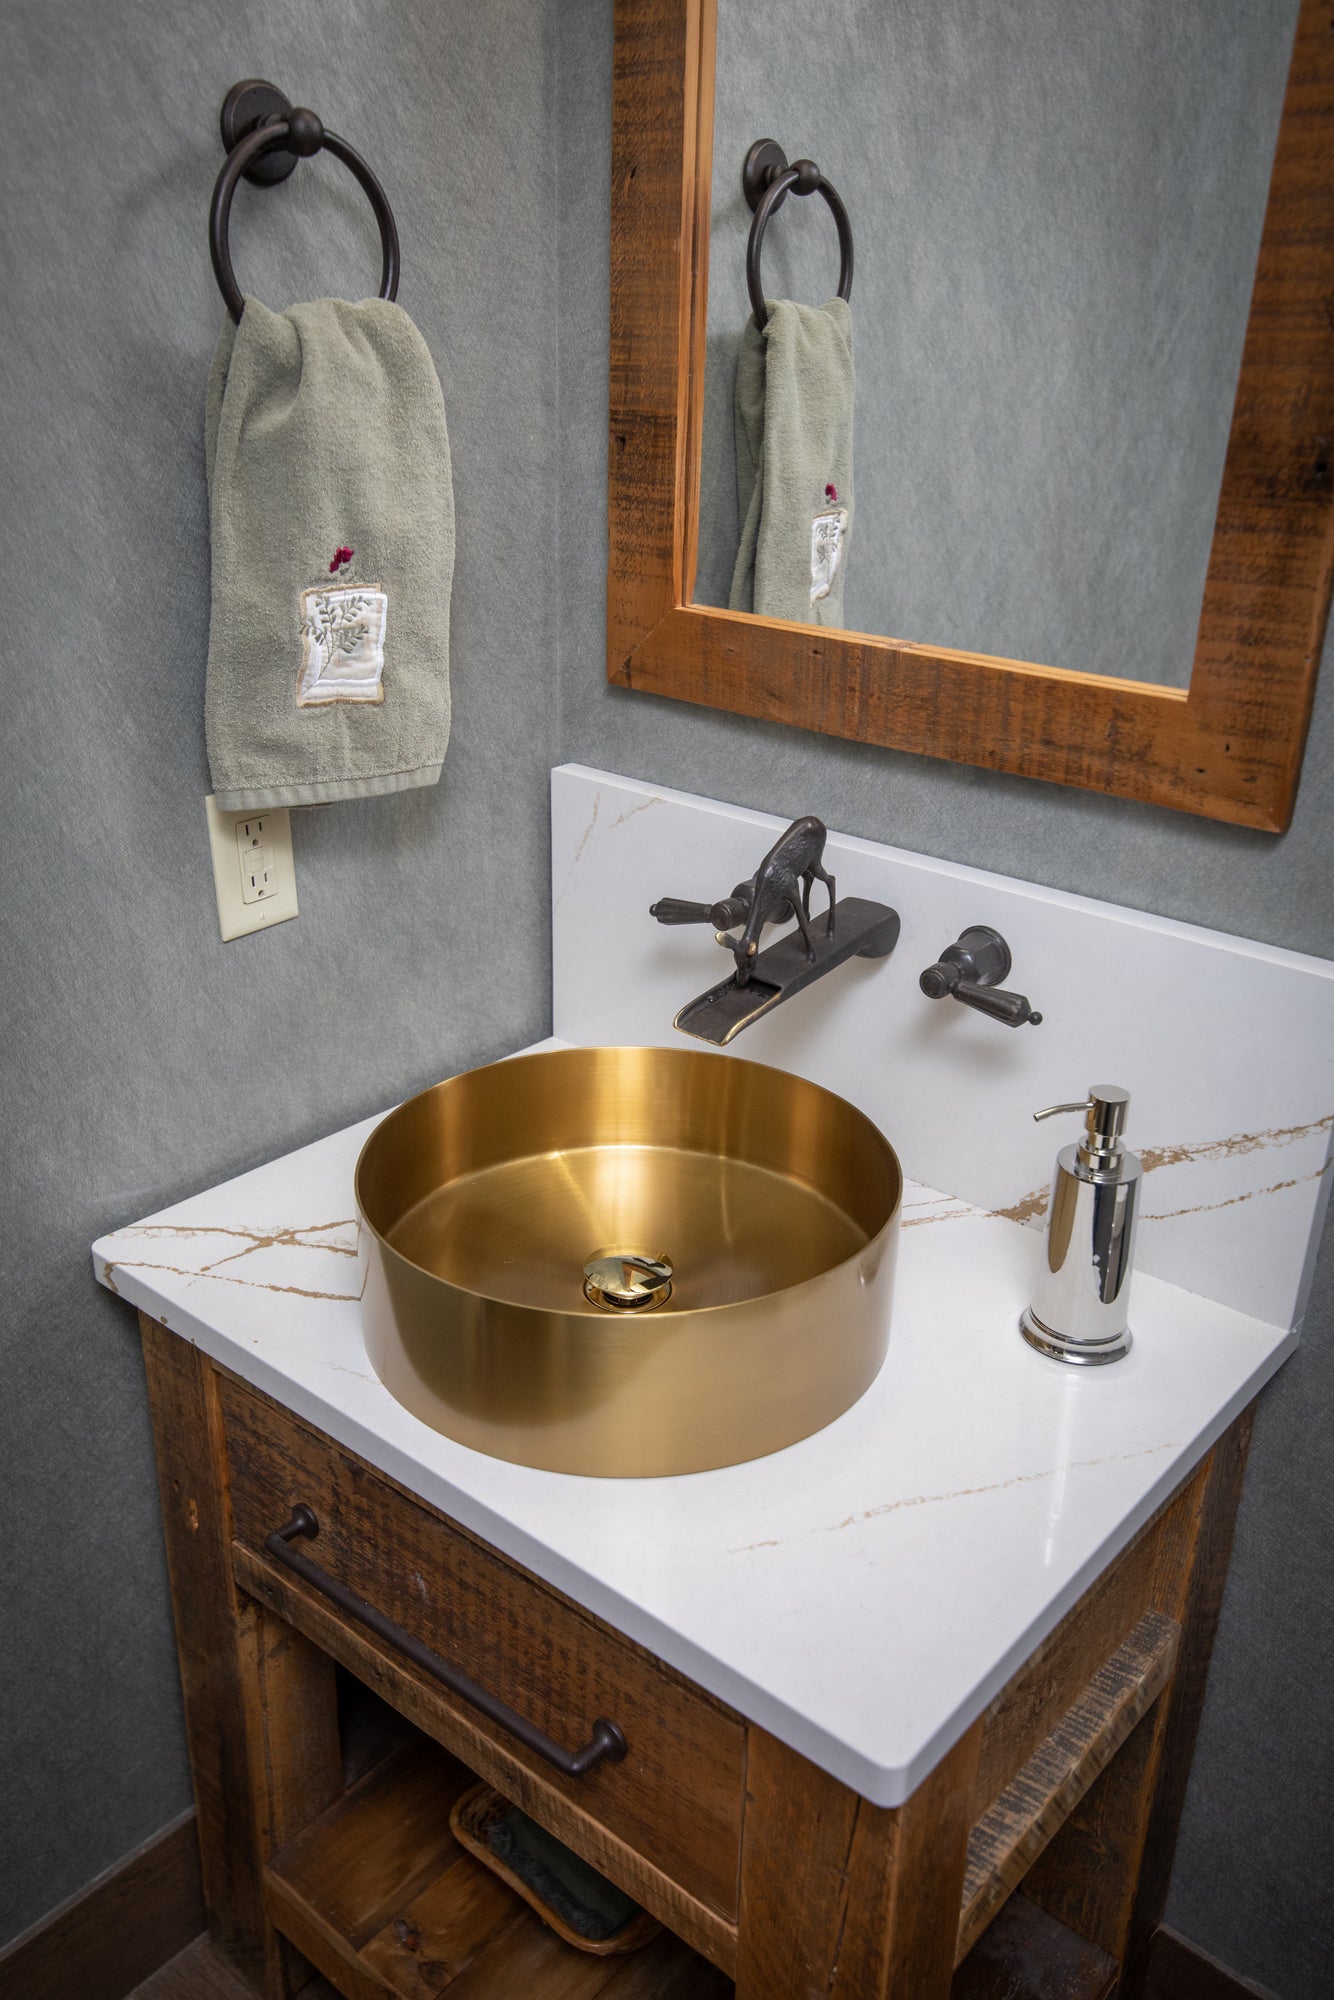 15" Round Stainless Steel Bathroom Vessel Sink with Drain in Gold